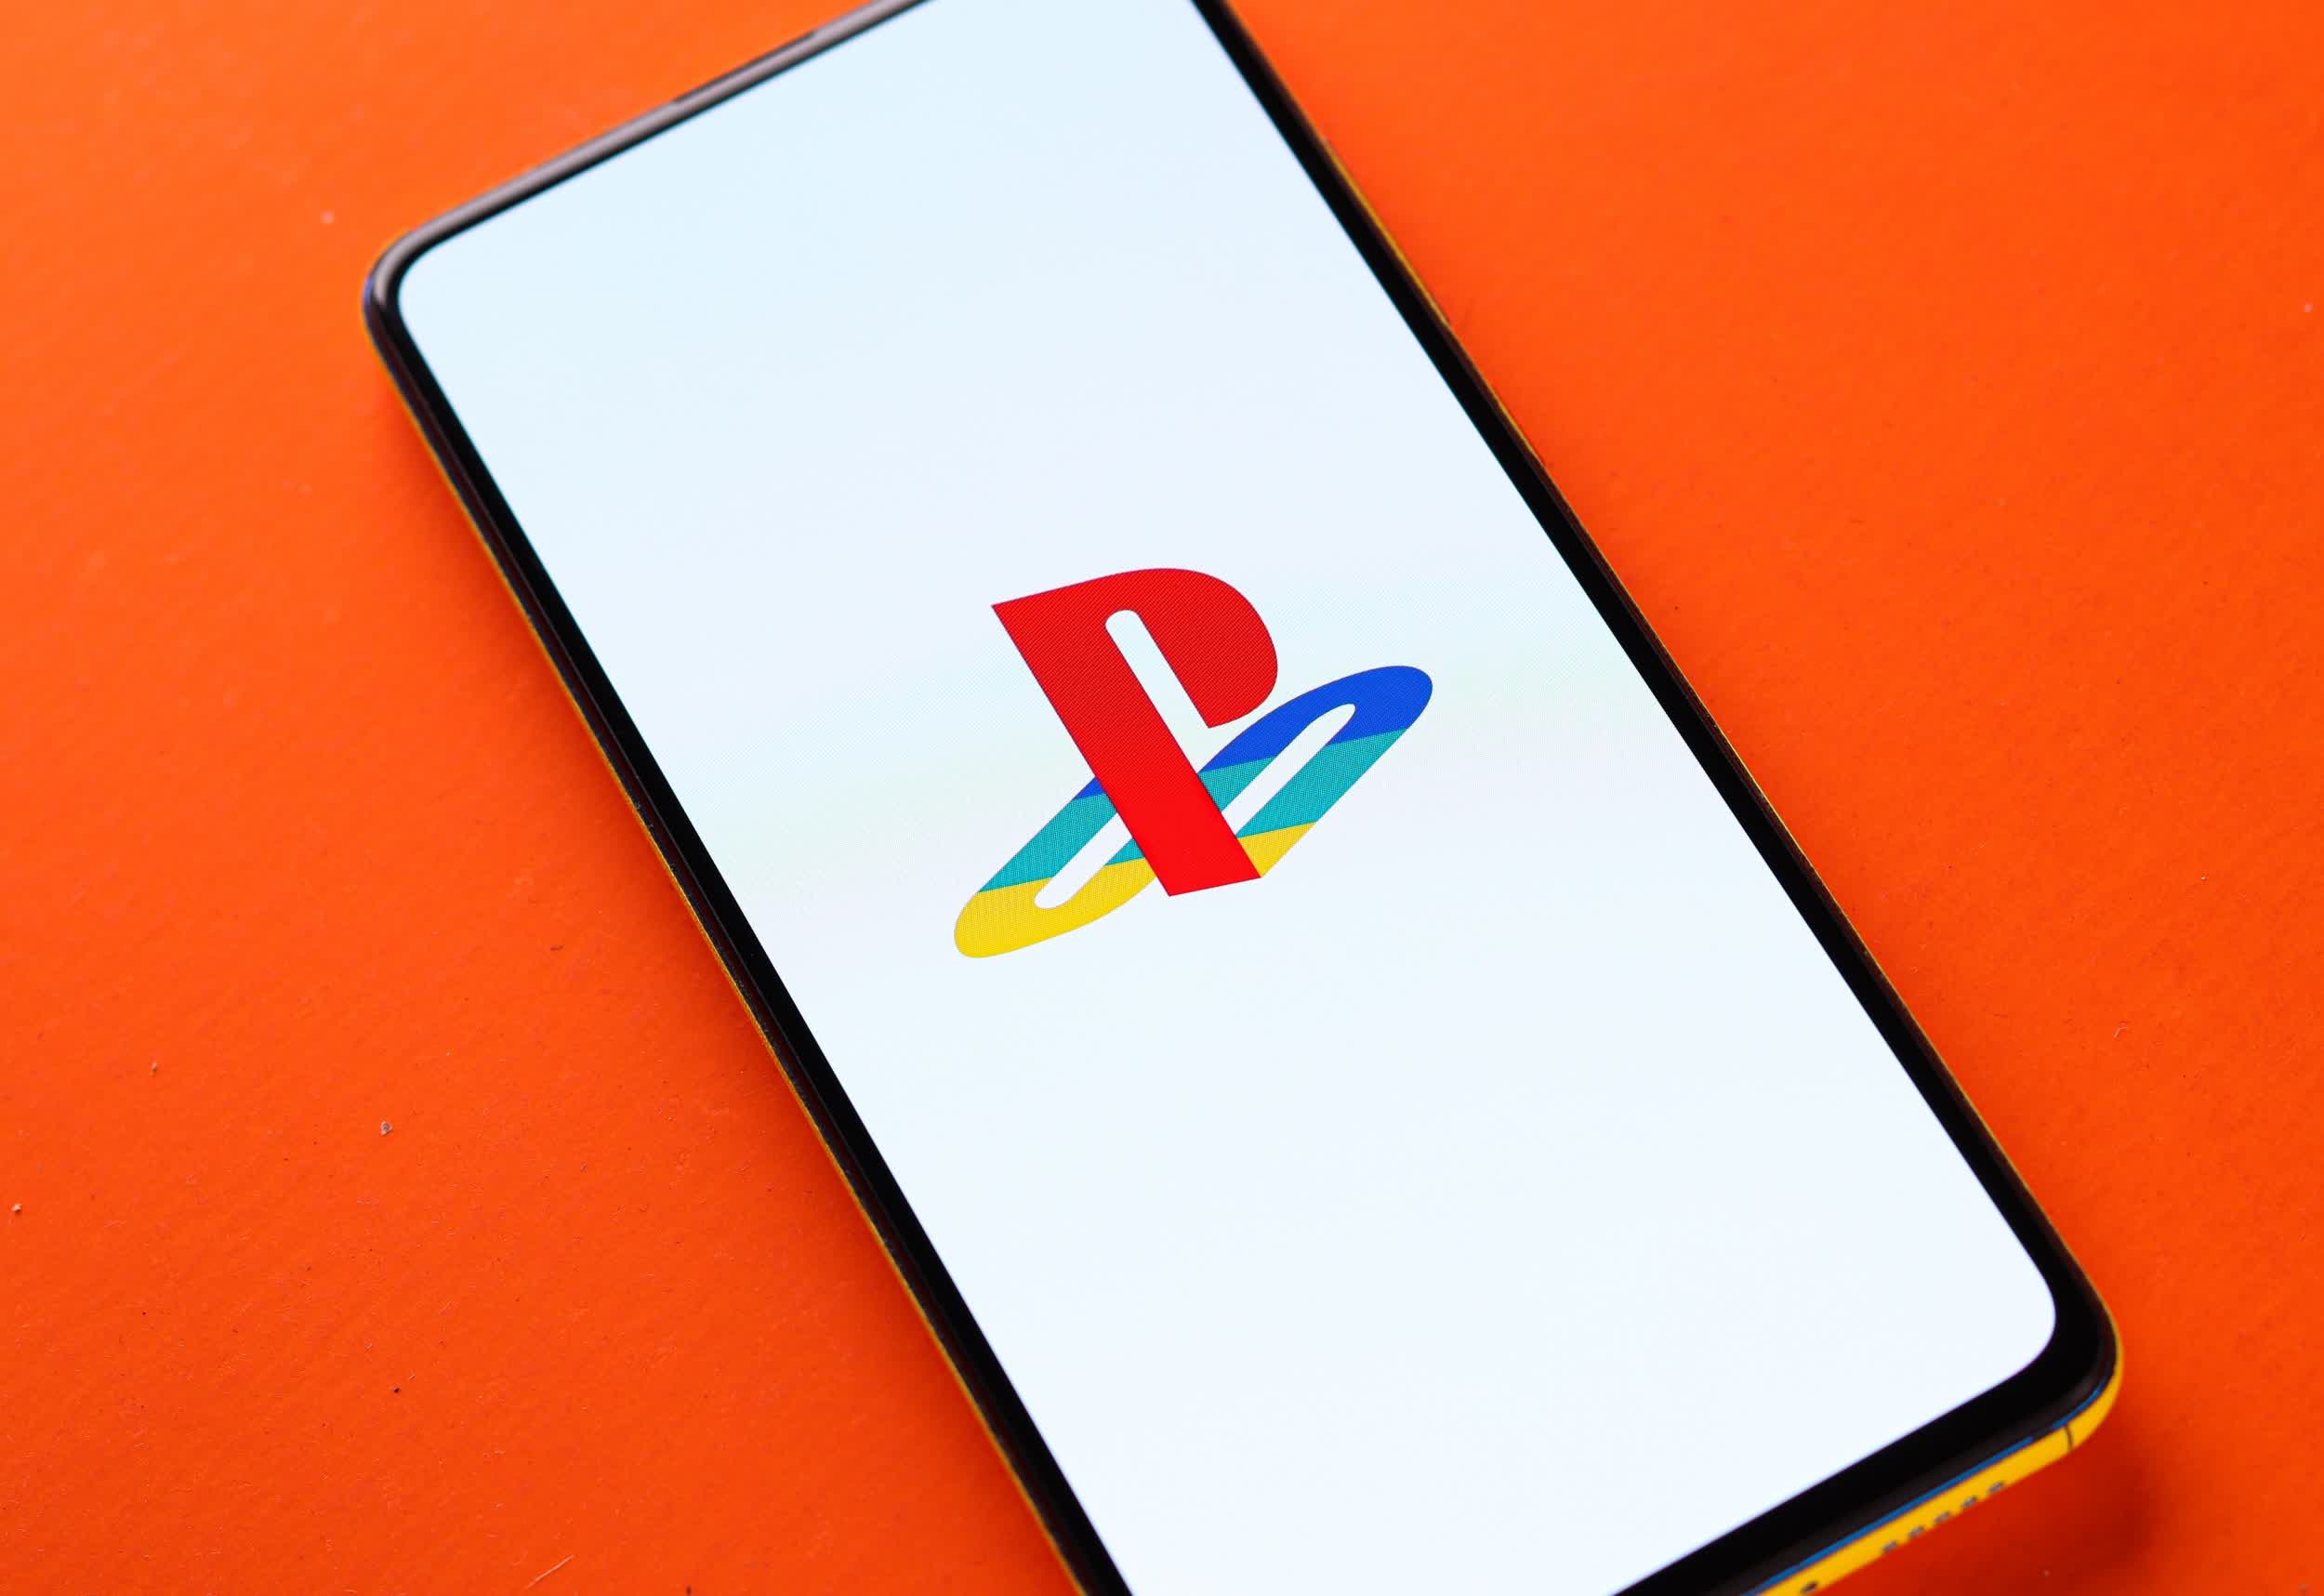 Sony wants to bring its top PlayStation franchises to mobile